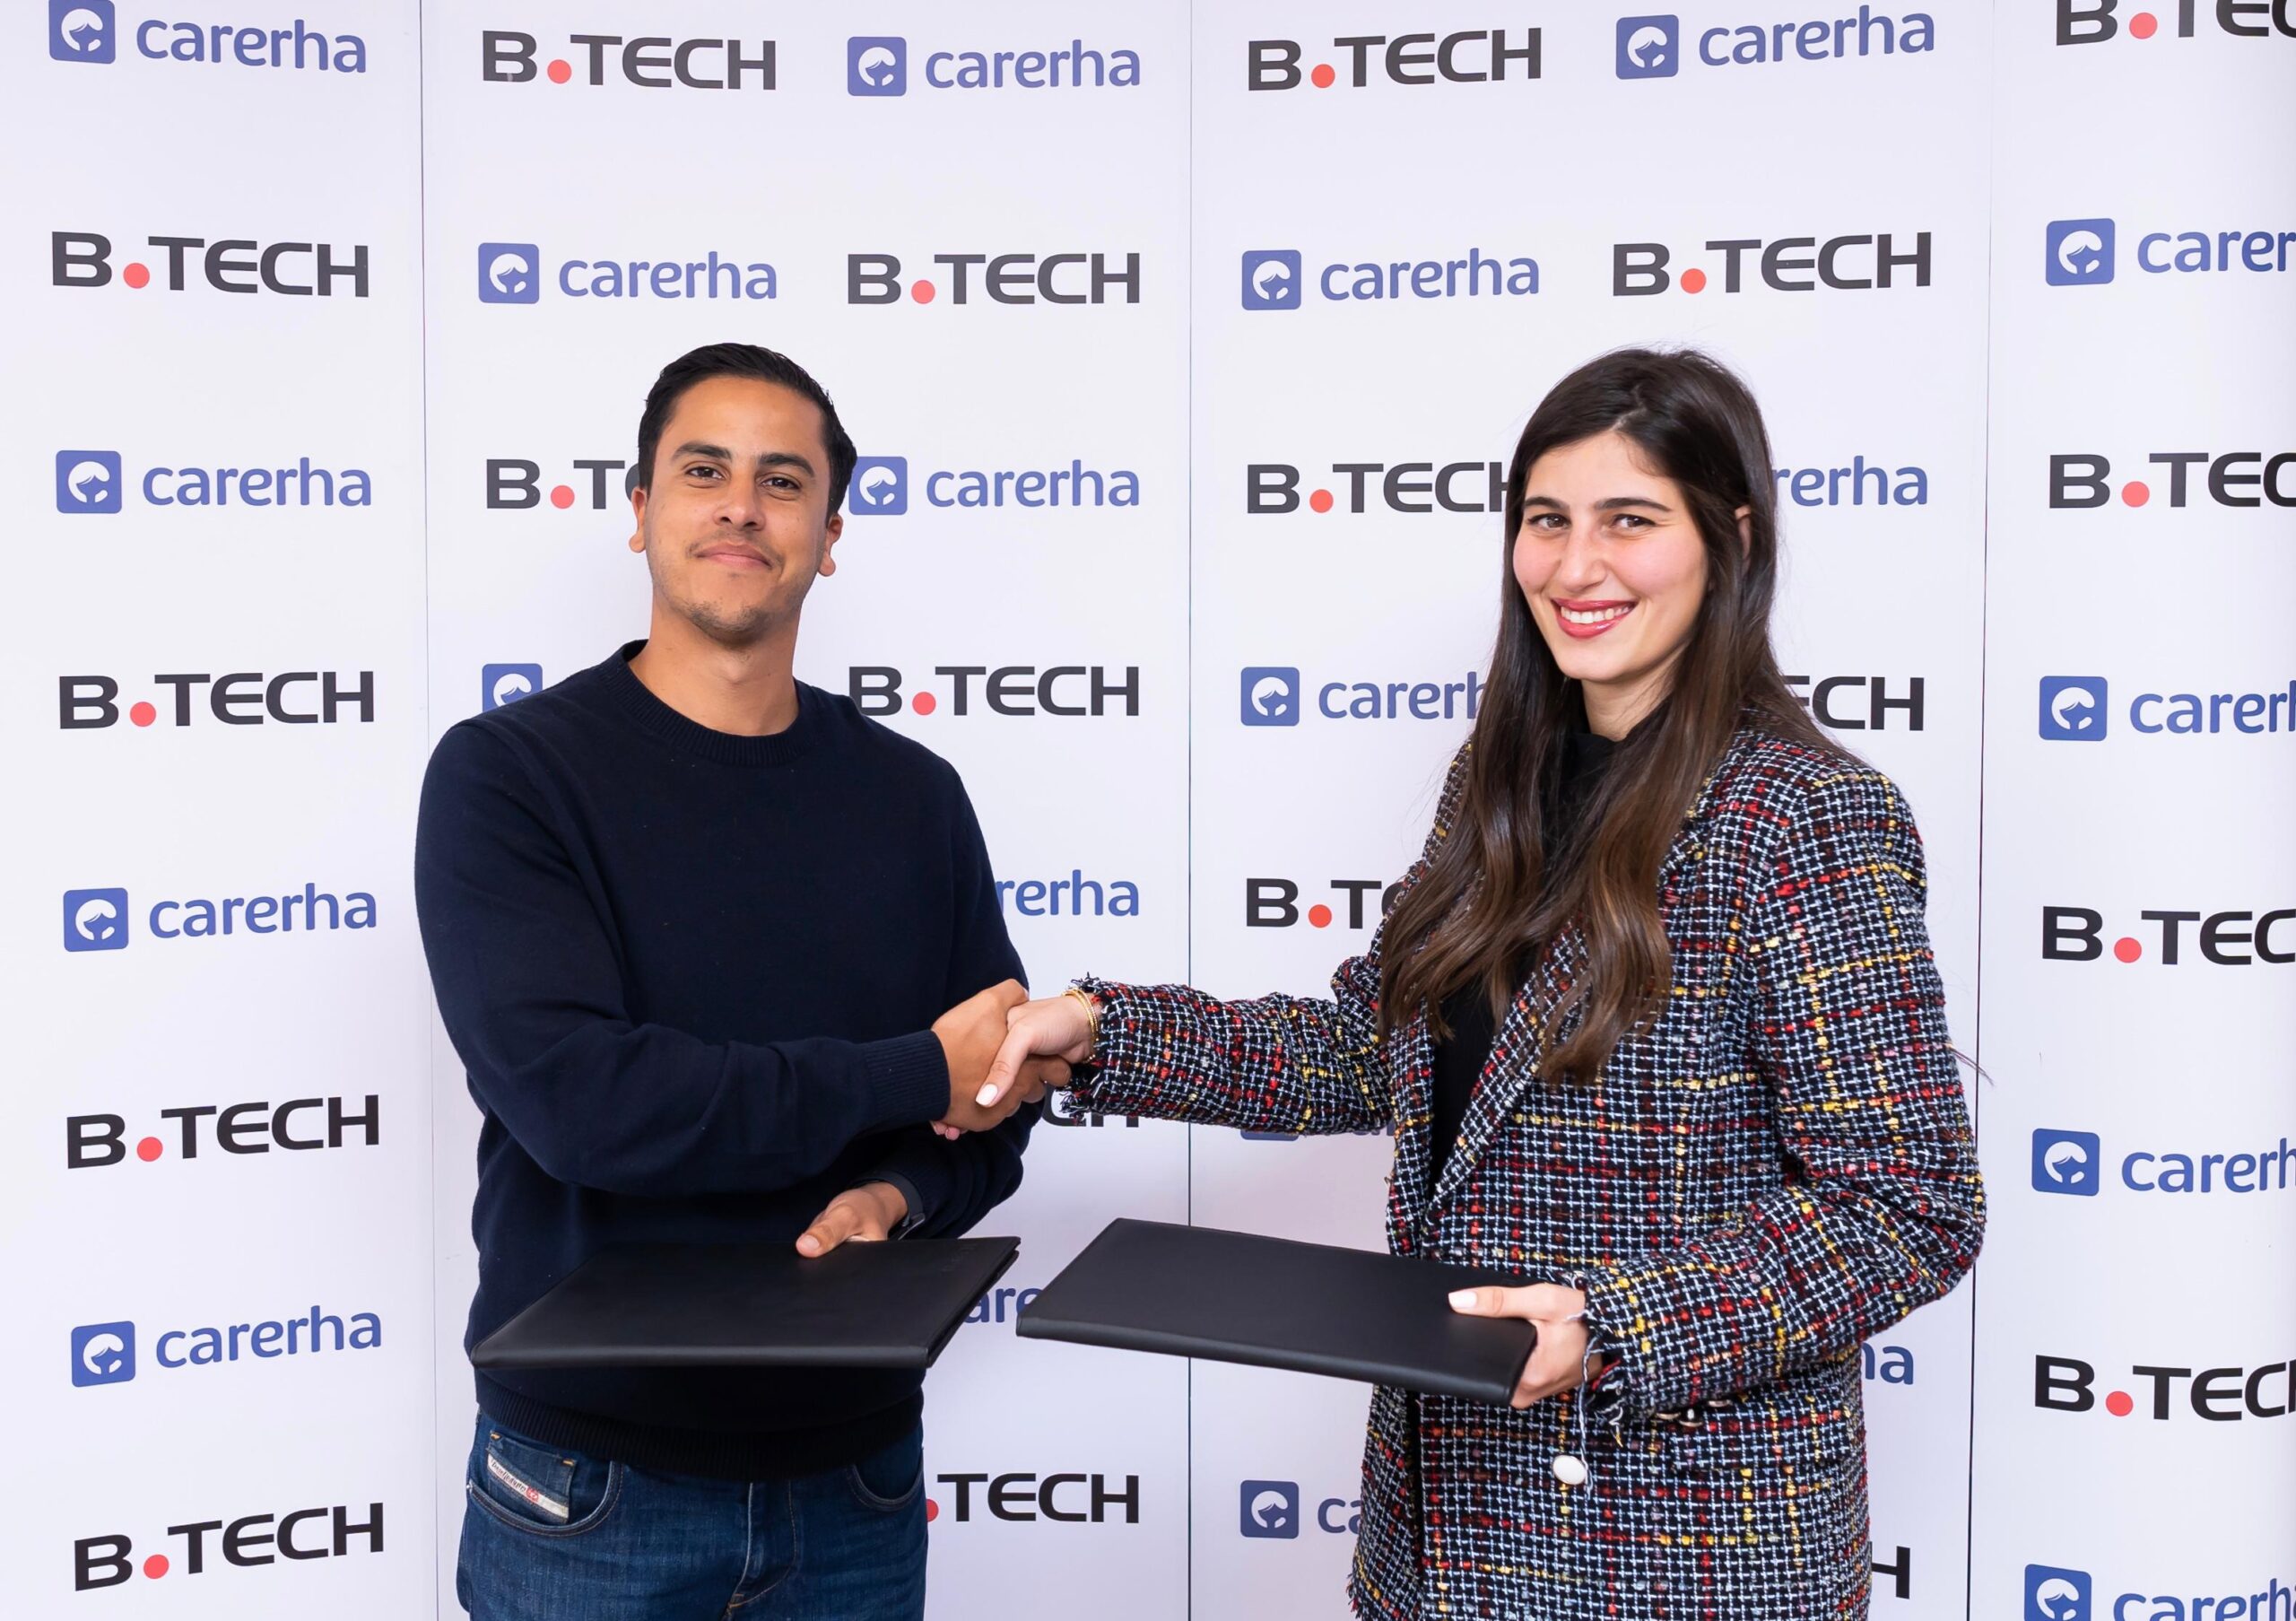 B.TECH inks MoU with Carerha to Nurture Women’s Role in ICT and Entrepreneurship Sectors